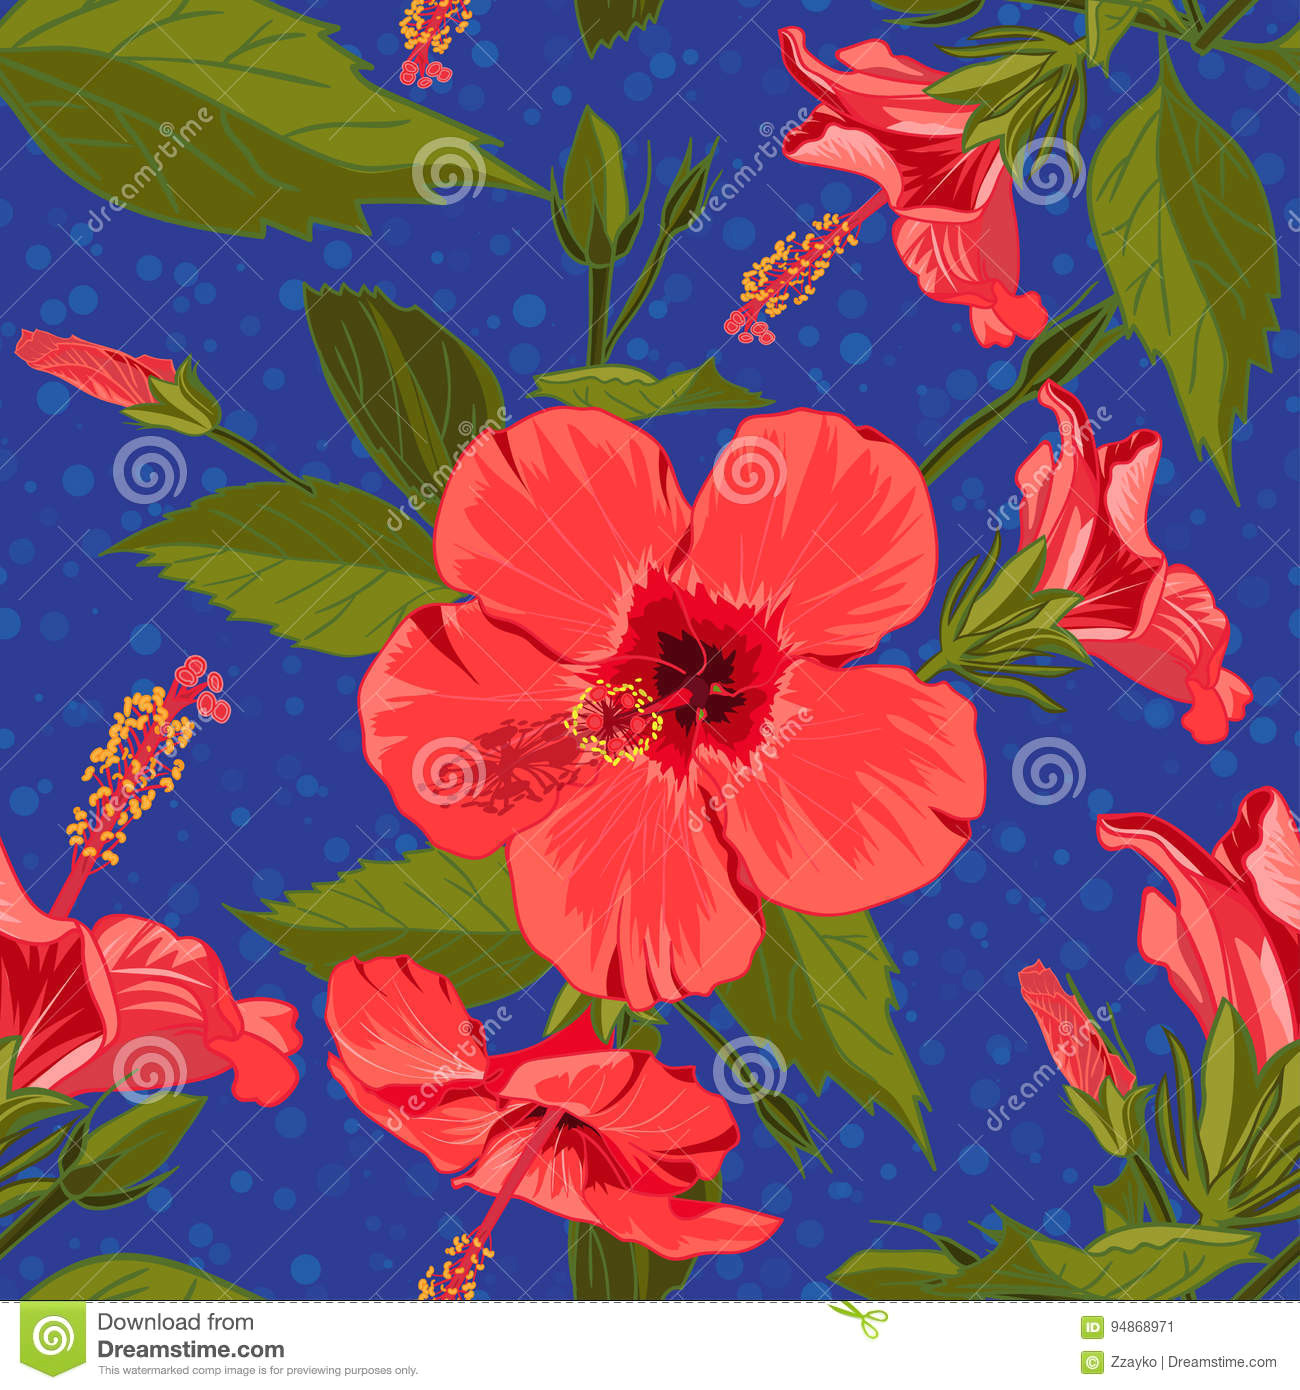 Drawings Of Tropical Flowers Seamless Hand Drawn Tropical Pattern with Jungle Exotic Hibiscus